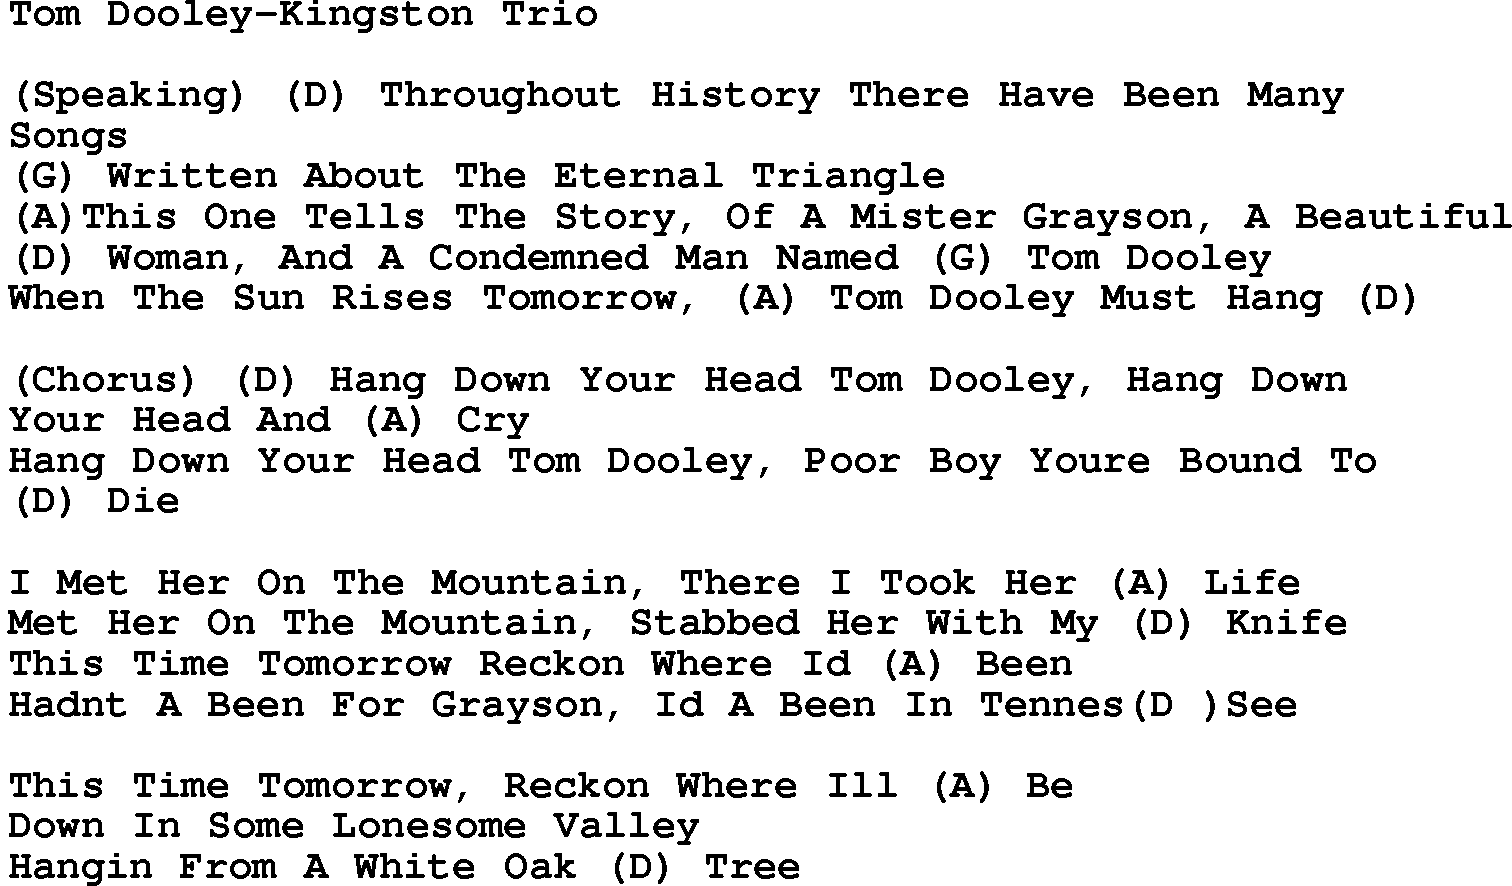 Country music song: Tom Dooley-Kingston Trio lyrics and chords